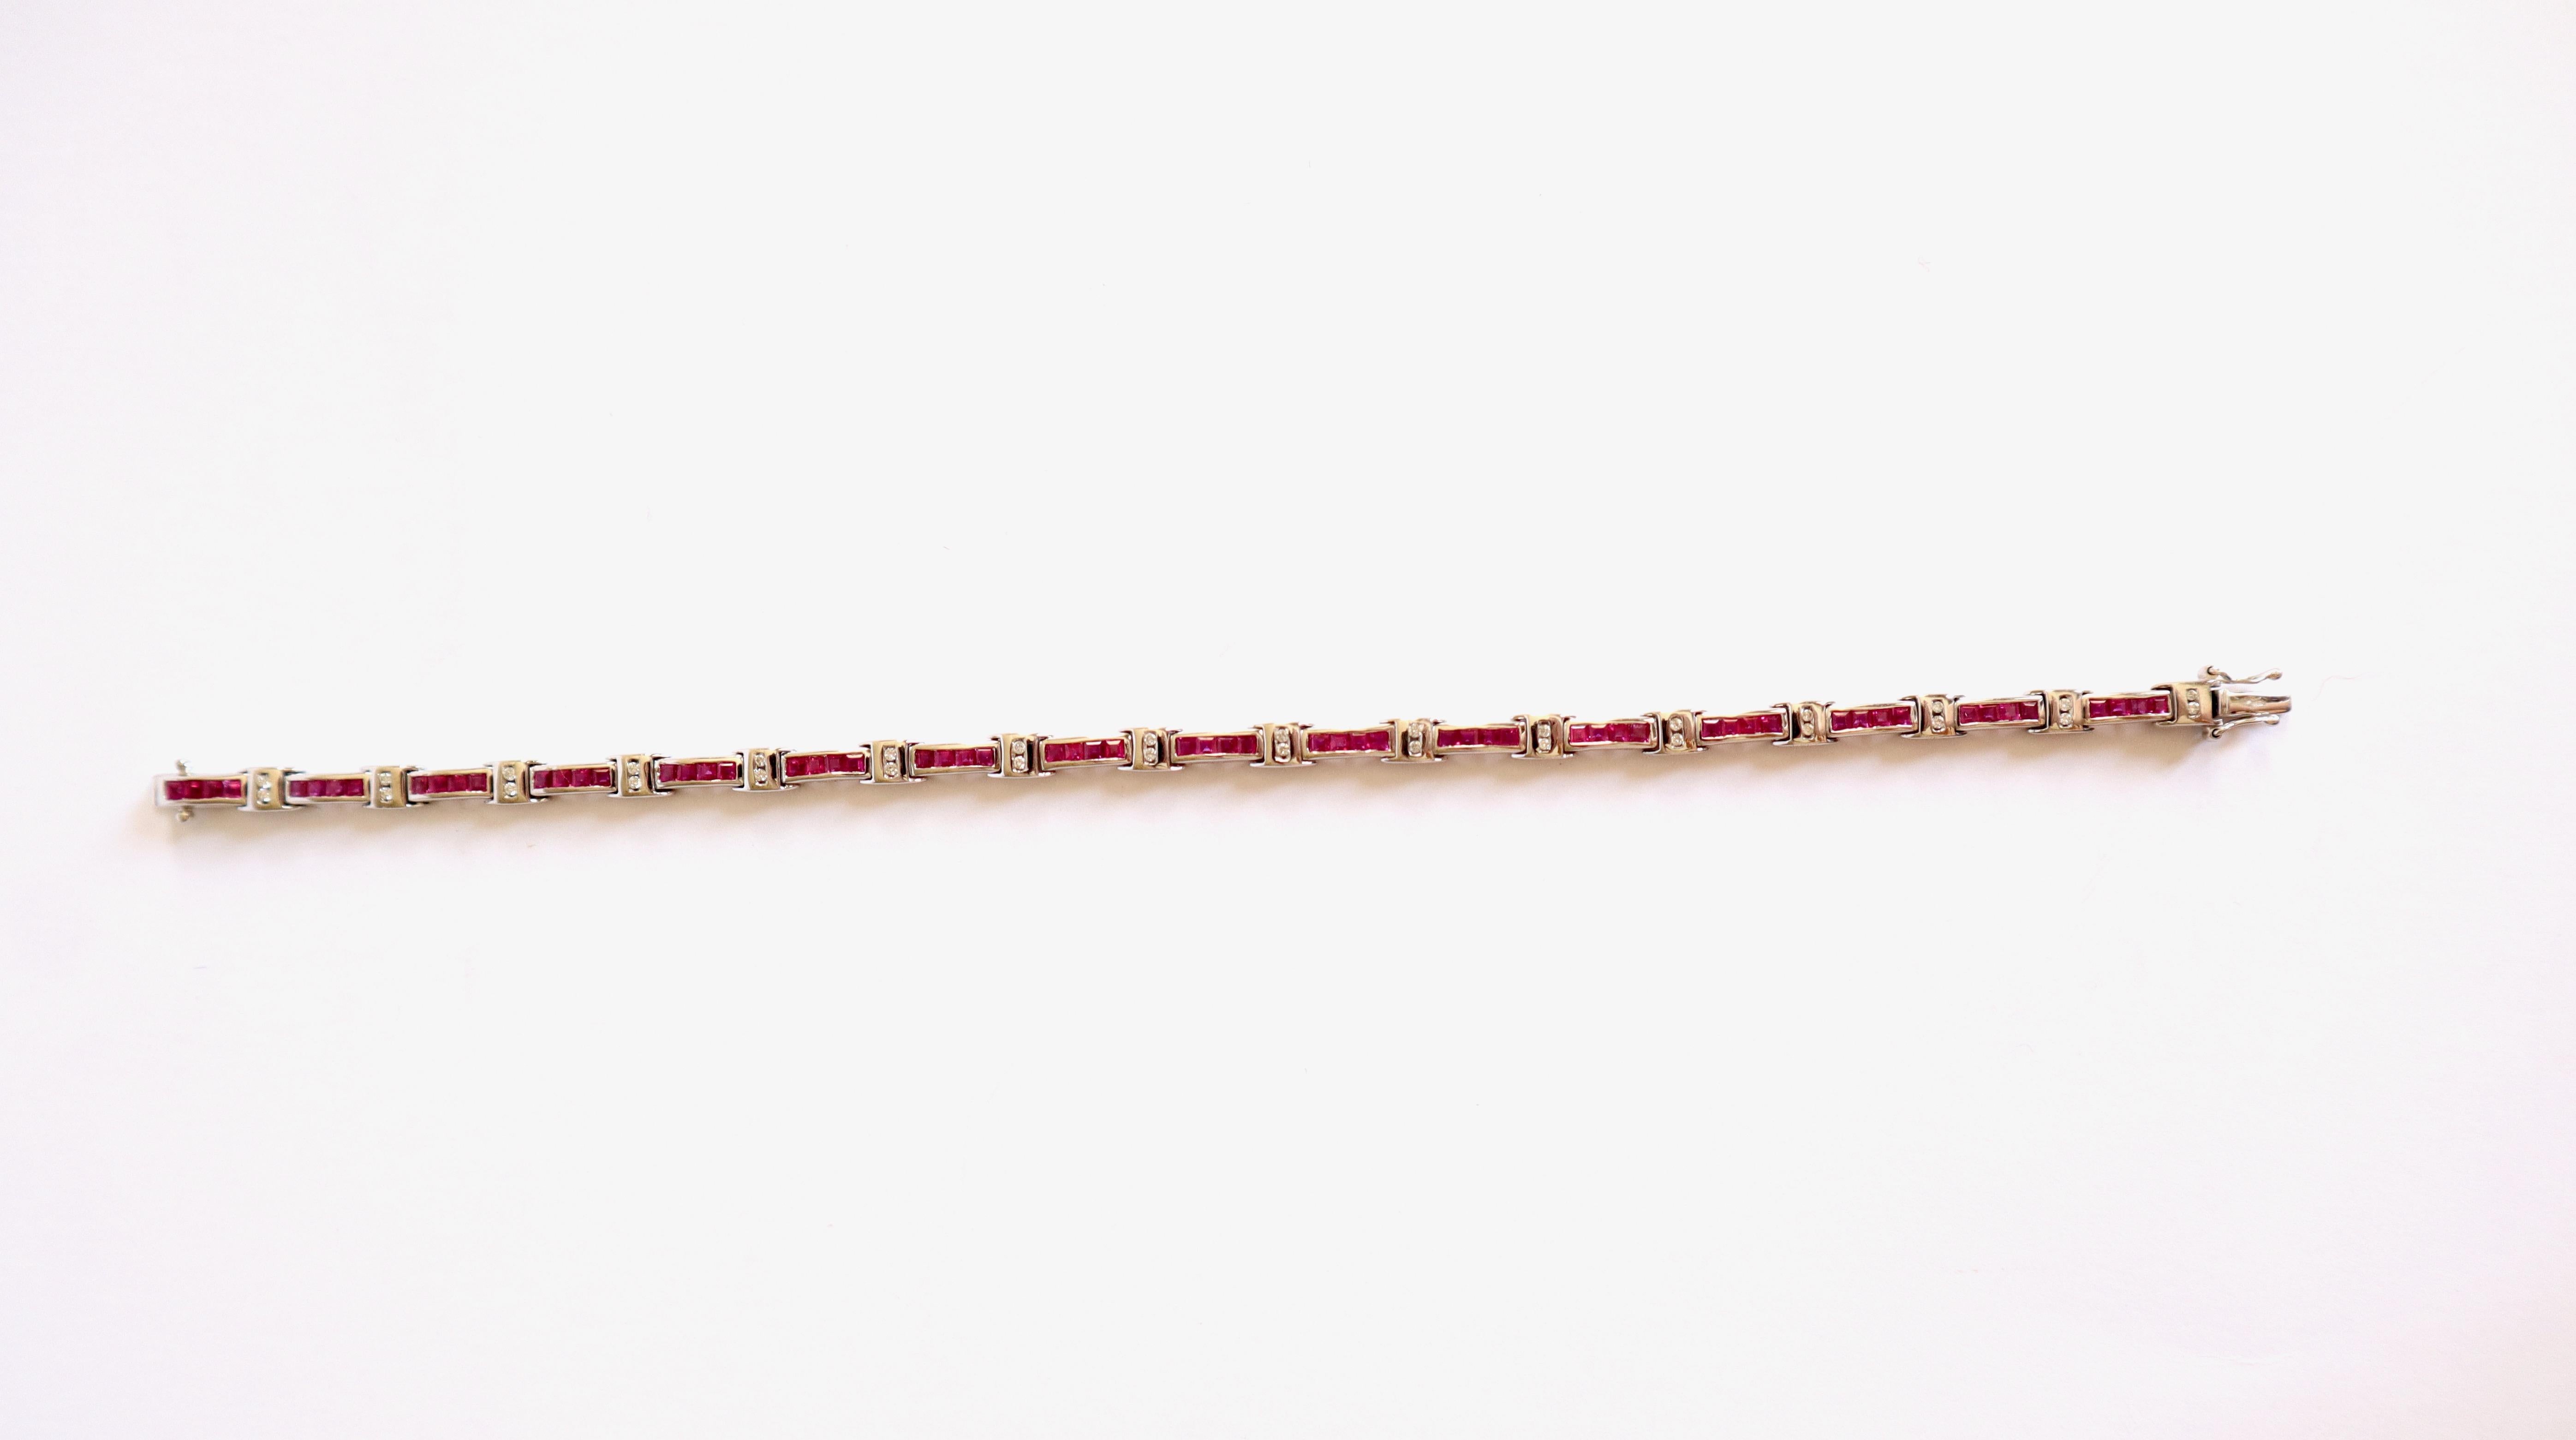 Set of Three line bracelets:
- Bracelet in 18-carat white gold, rubies and diamonds composed of 16 motifs of 4 calibrated rail-set rubies for a total weight of 3.28 carats alternating with 16 motifs of 2 diamonds for a total weight of 0.19